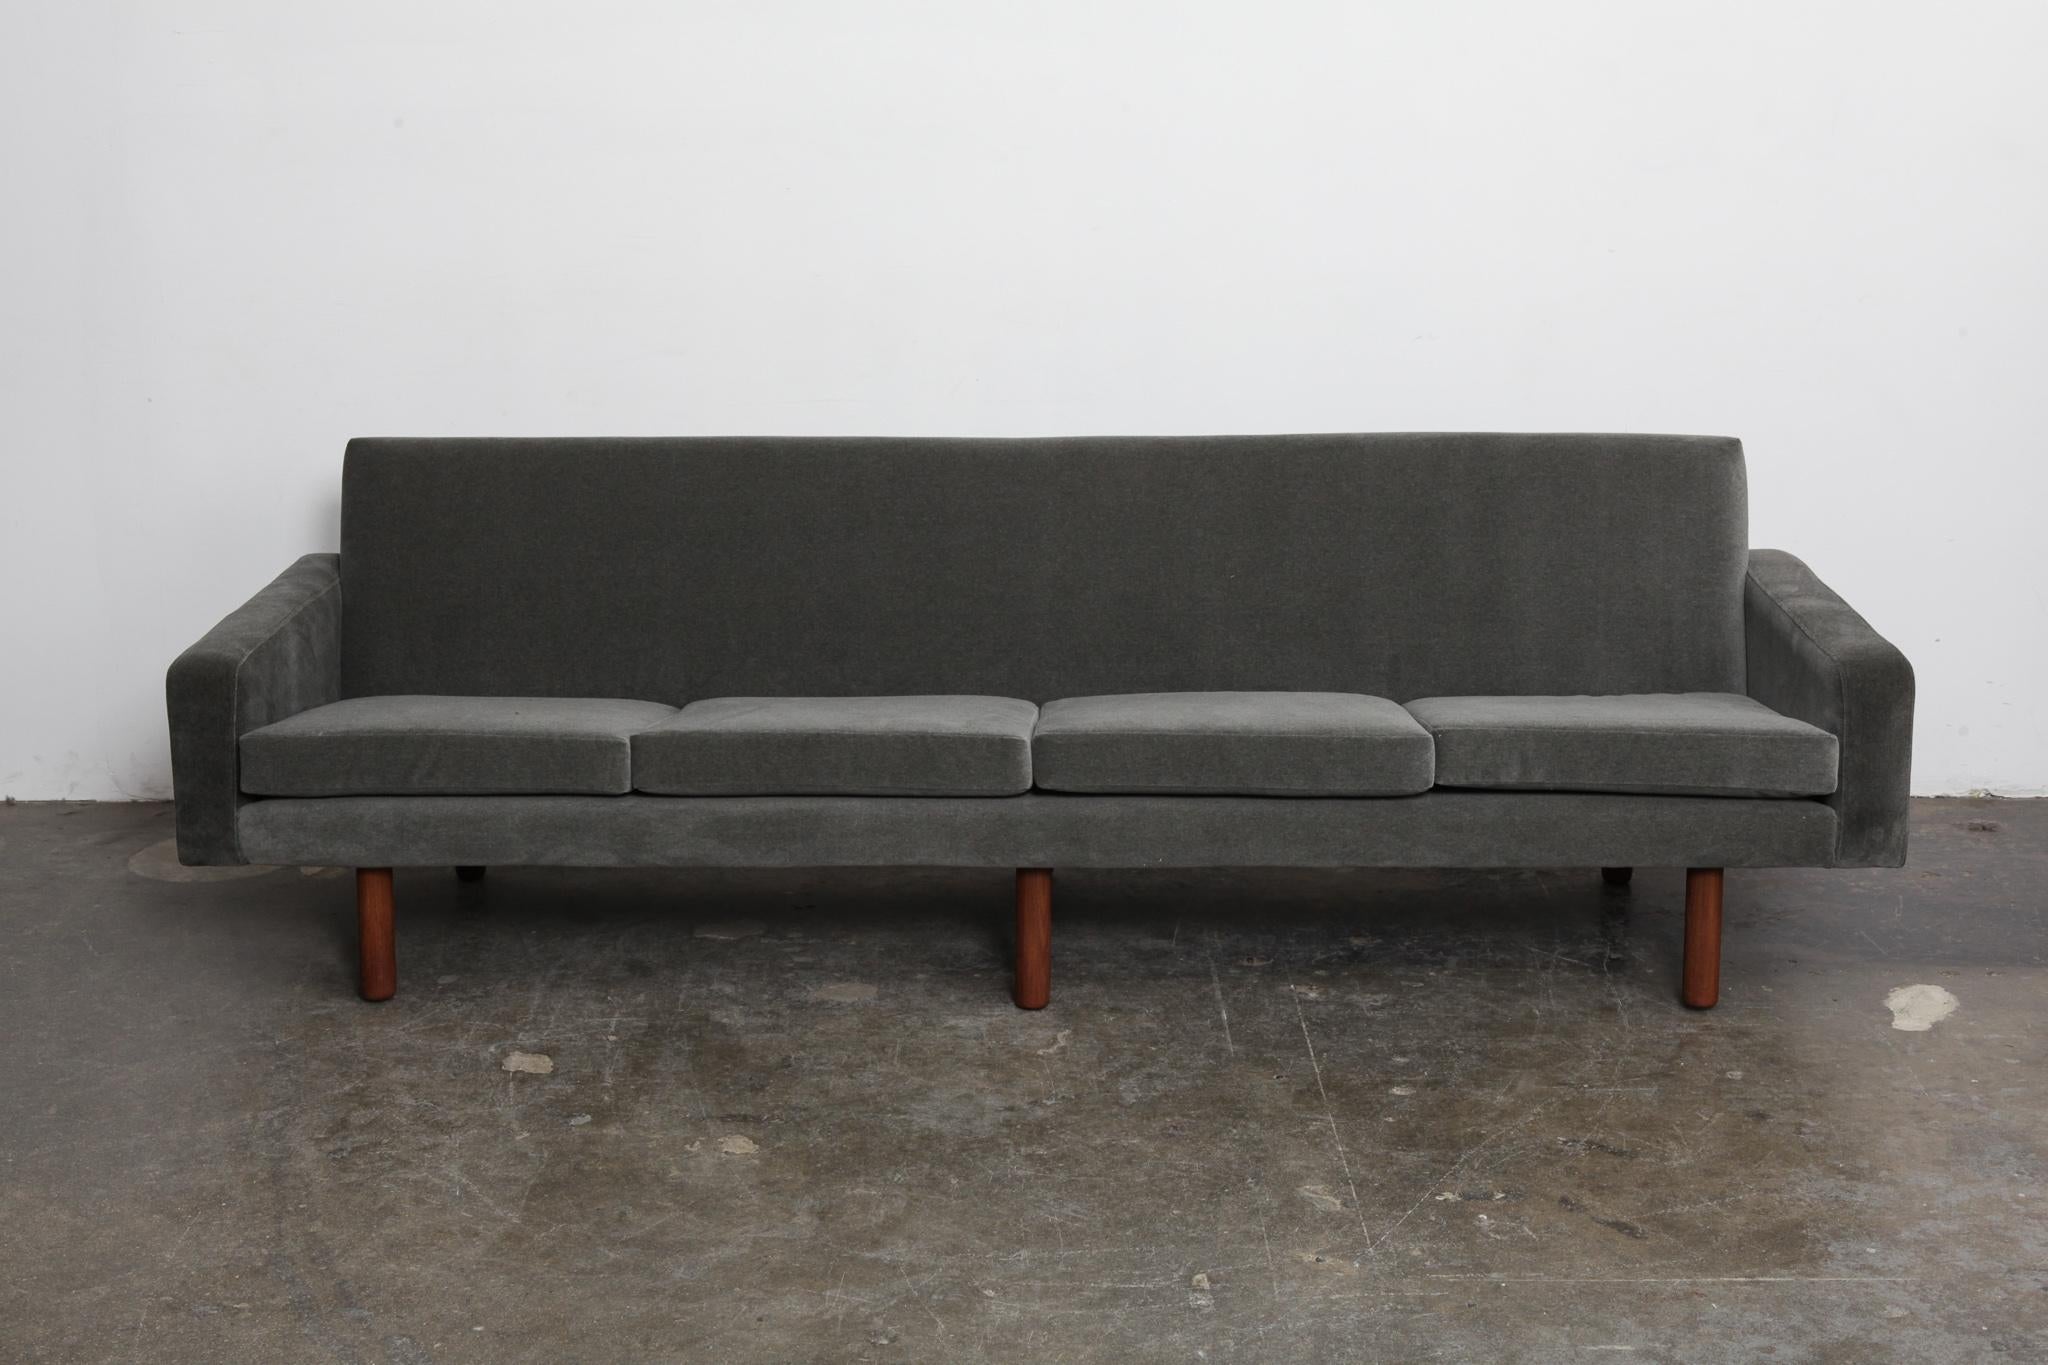 Danish 4-seat 1960s fabric sofa with 4 loose seat cushions and tight back style and straight clean lines throughout, sitting on 6 tapering solid teak legs (that have been refinished). Newly upholstered in a grey mohair/velvet fabric, teak legs